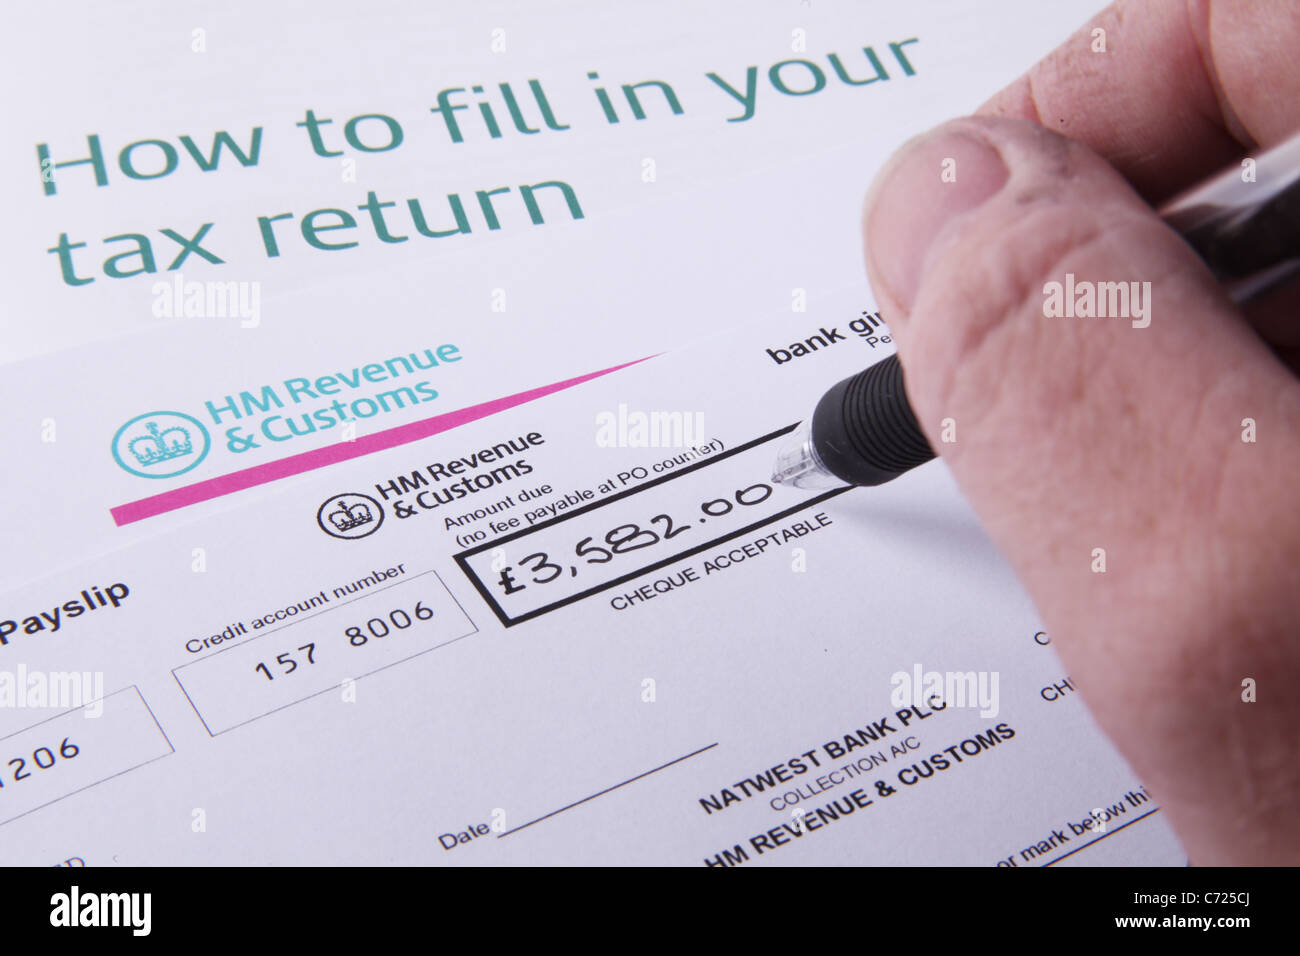 personal-finance-concept-inland-revenue-tax-return-making-a-payment